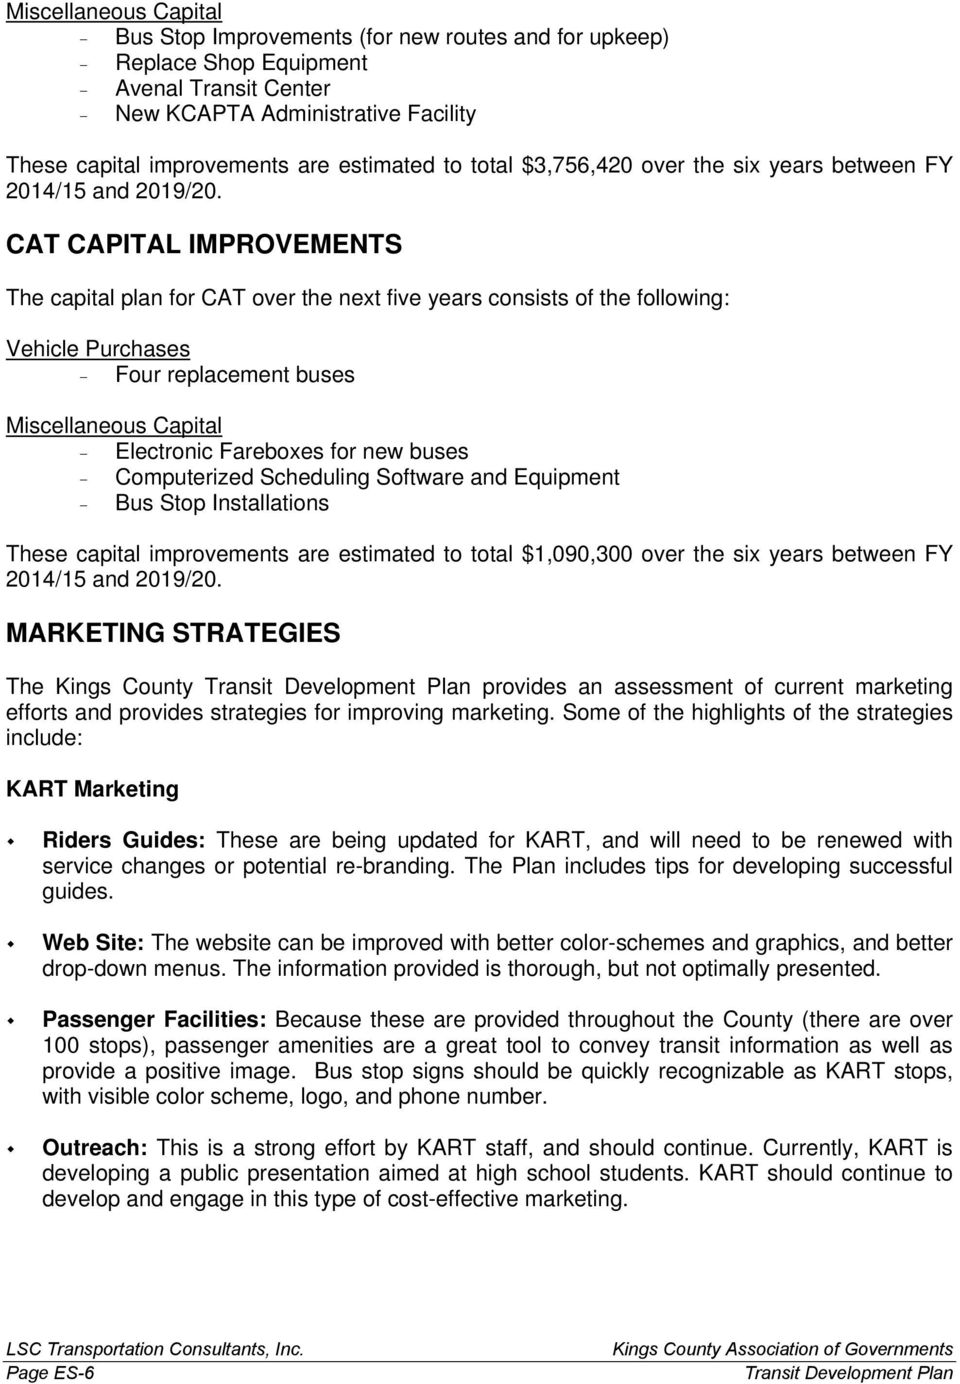 CAT CAPITAL IMPROVEMENTS The capital plan for CAT over the next five years consists of the following: Vehicle Purchases - Four replacement buses Miscellaneous Capital - Electronic Fareboxes for new